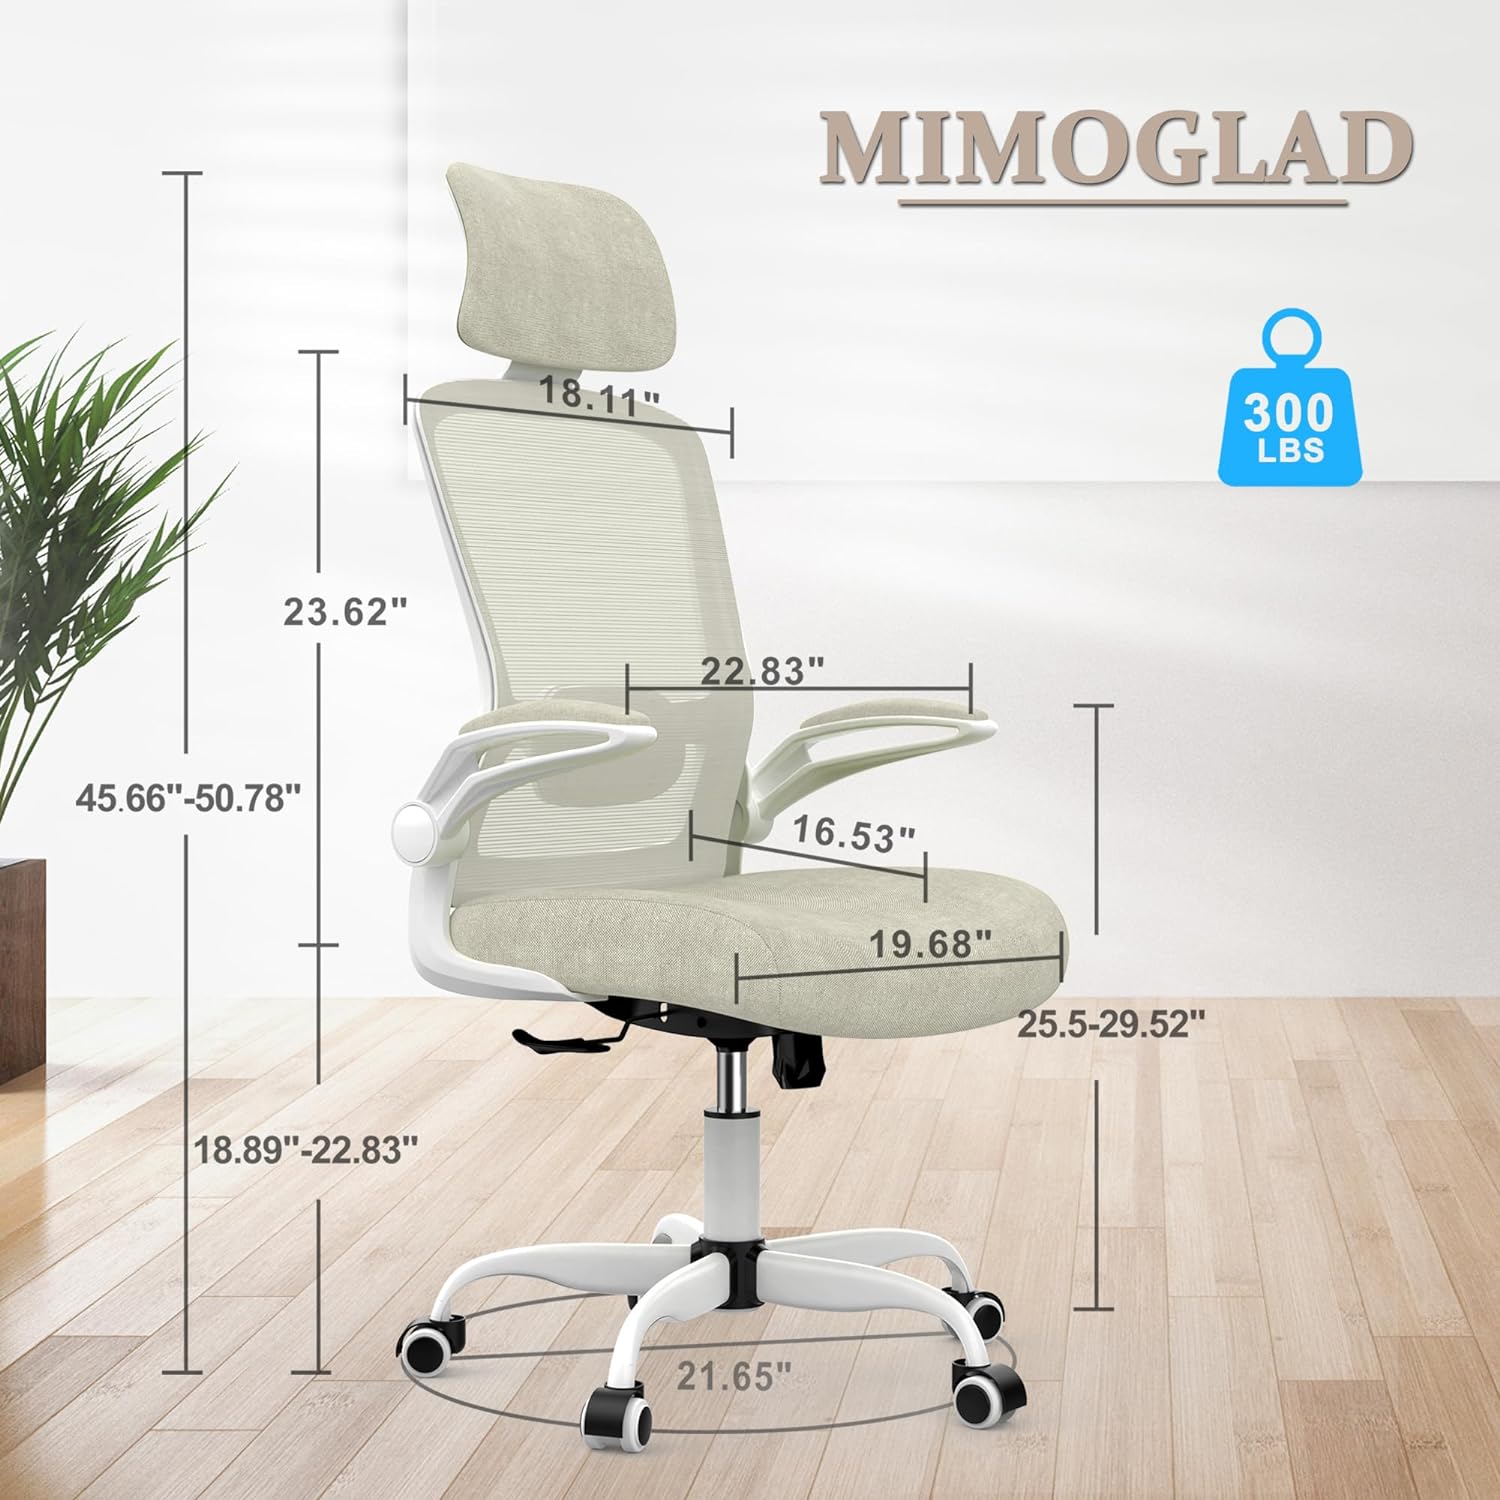 https://bigbigmart.com/wp-content/uploads/2023/12/Mimoglad-Office-Chair-High-Back-Ergonomic-Desk-Chair-with-Adjustable-Lumbar-Support-and-Headrest-Swivel-Task-Chair-with-flip-up-Armrests-for-Guitar-Playing-5-Years-Warranty-Beige1.jpg